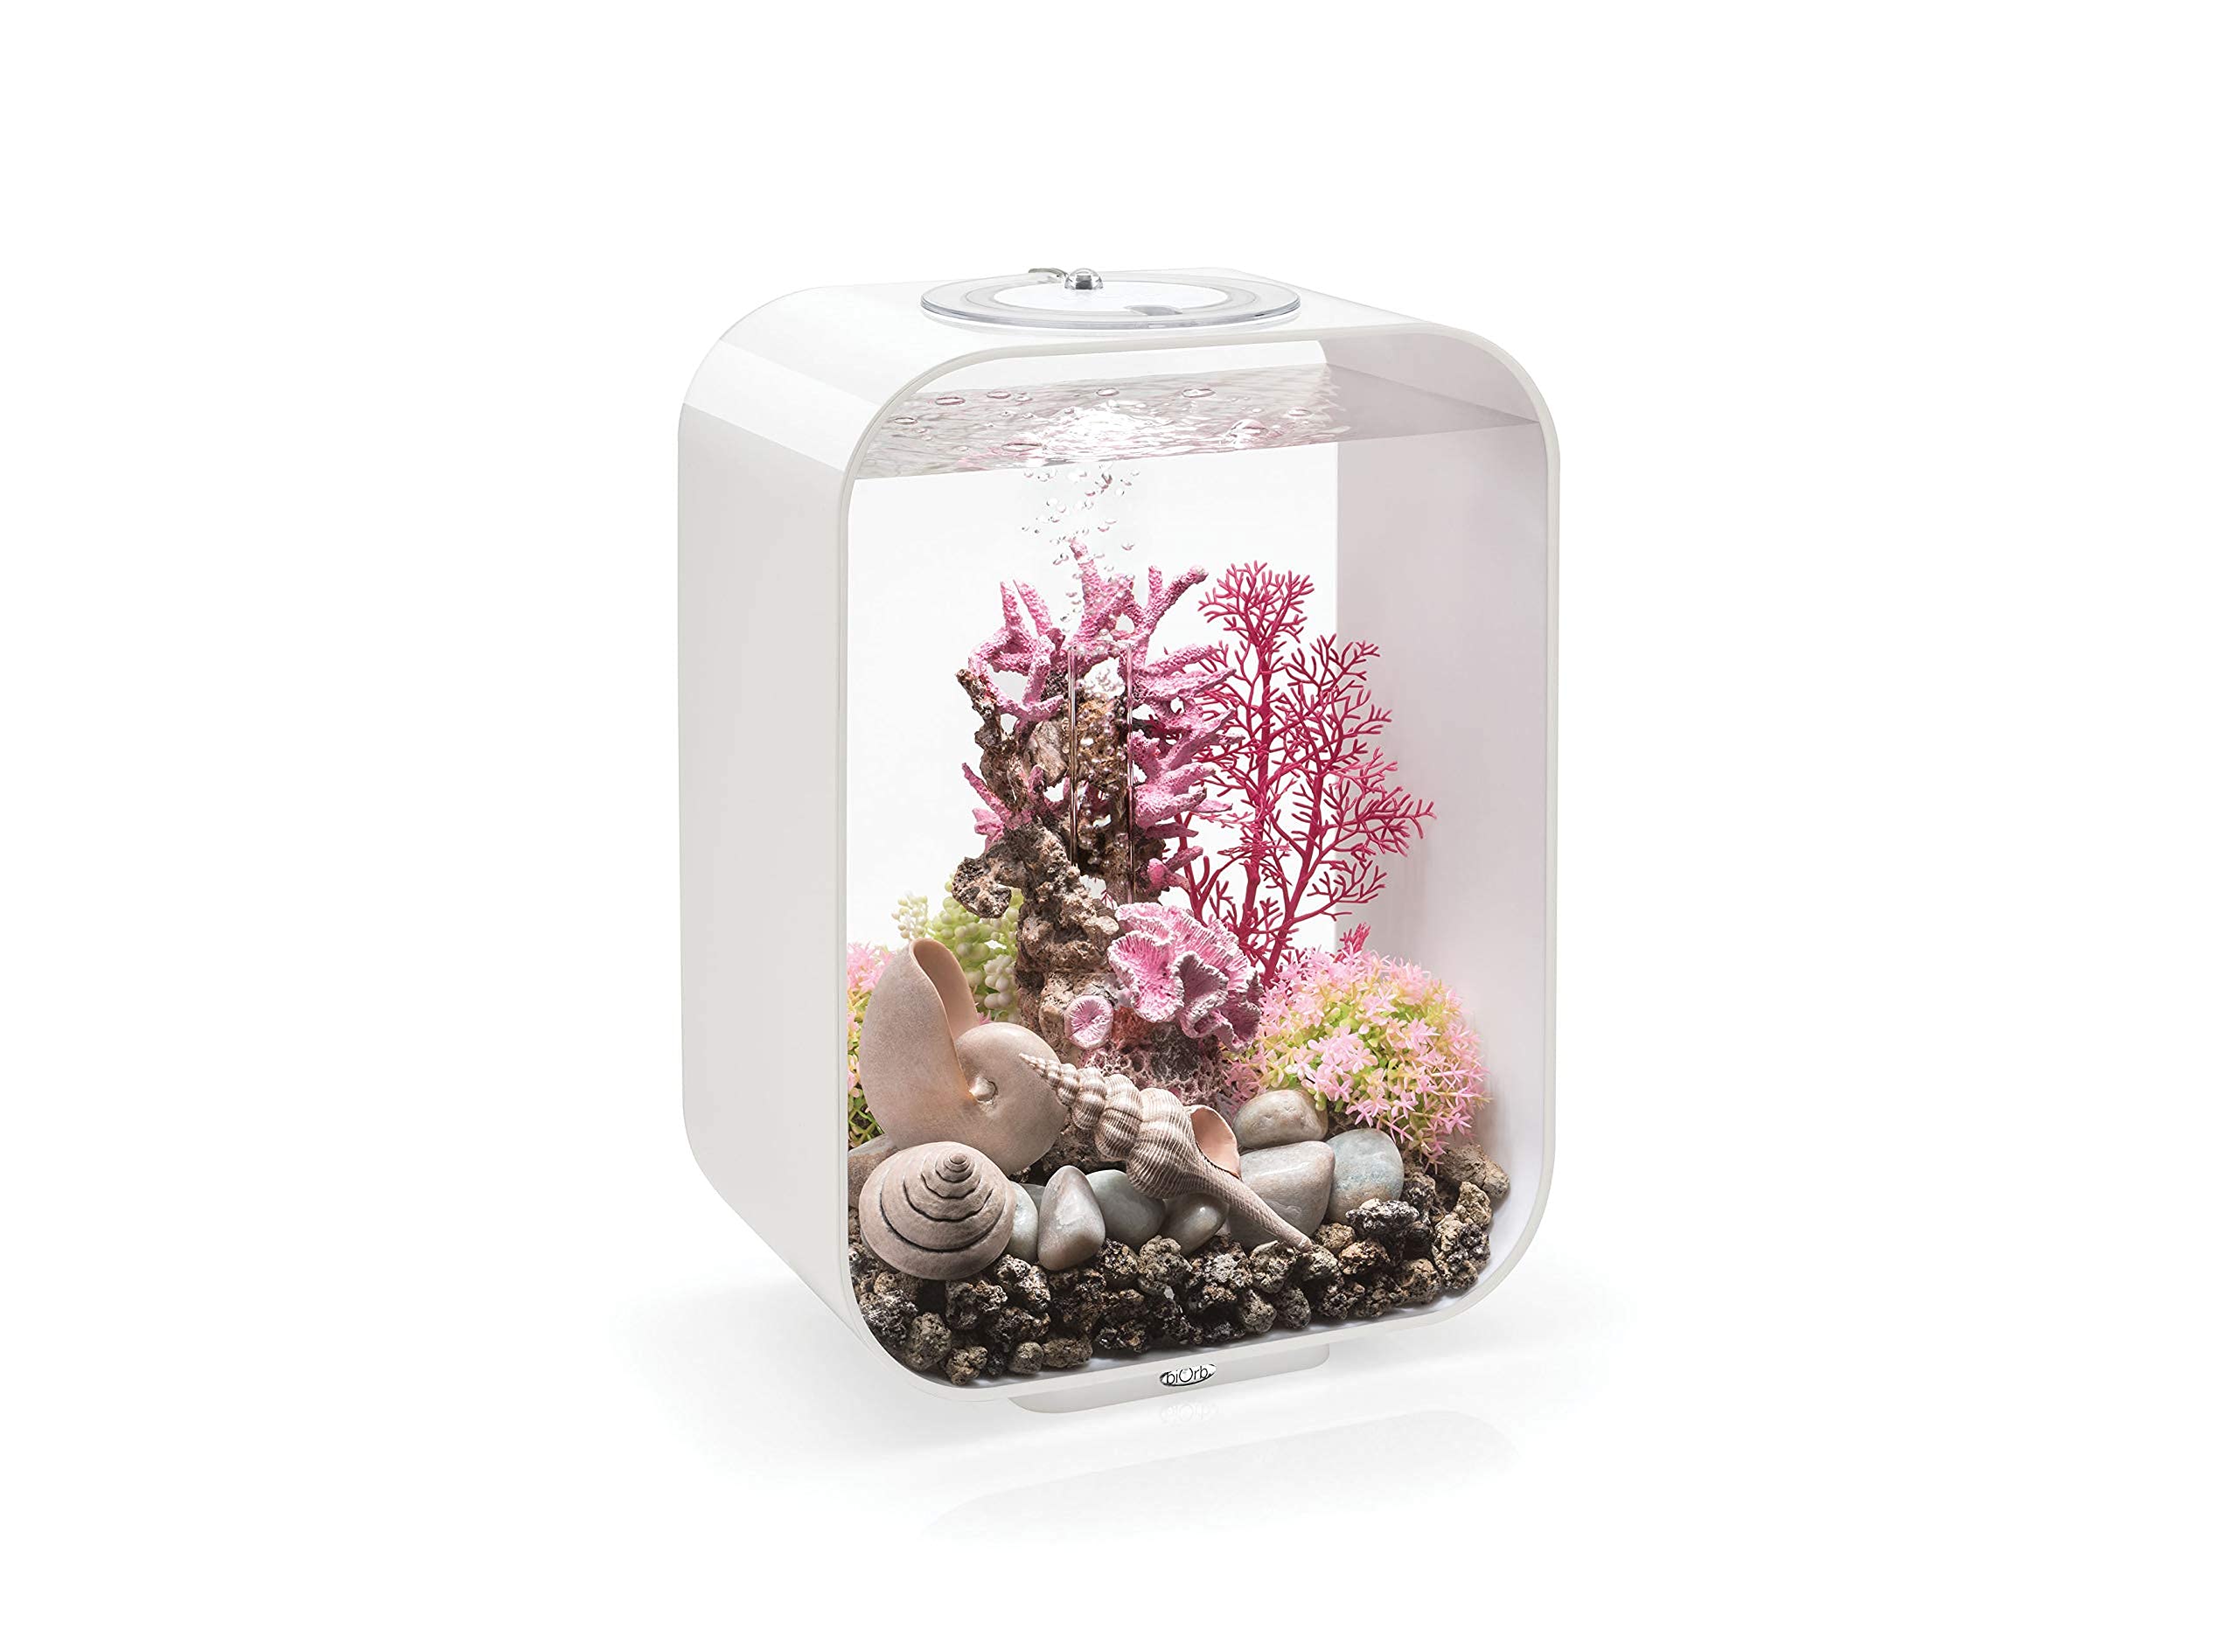 biOrb Life 15: Modern Compact Aquarium with Remote-Controlled LED Lights